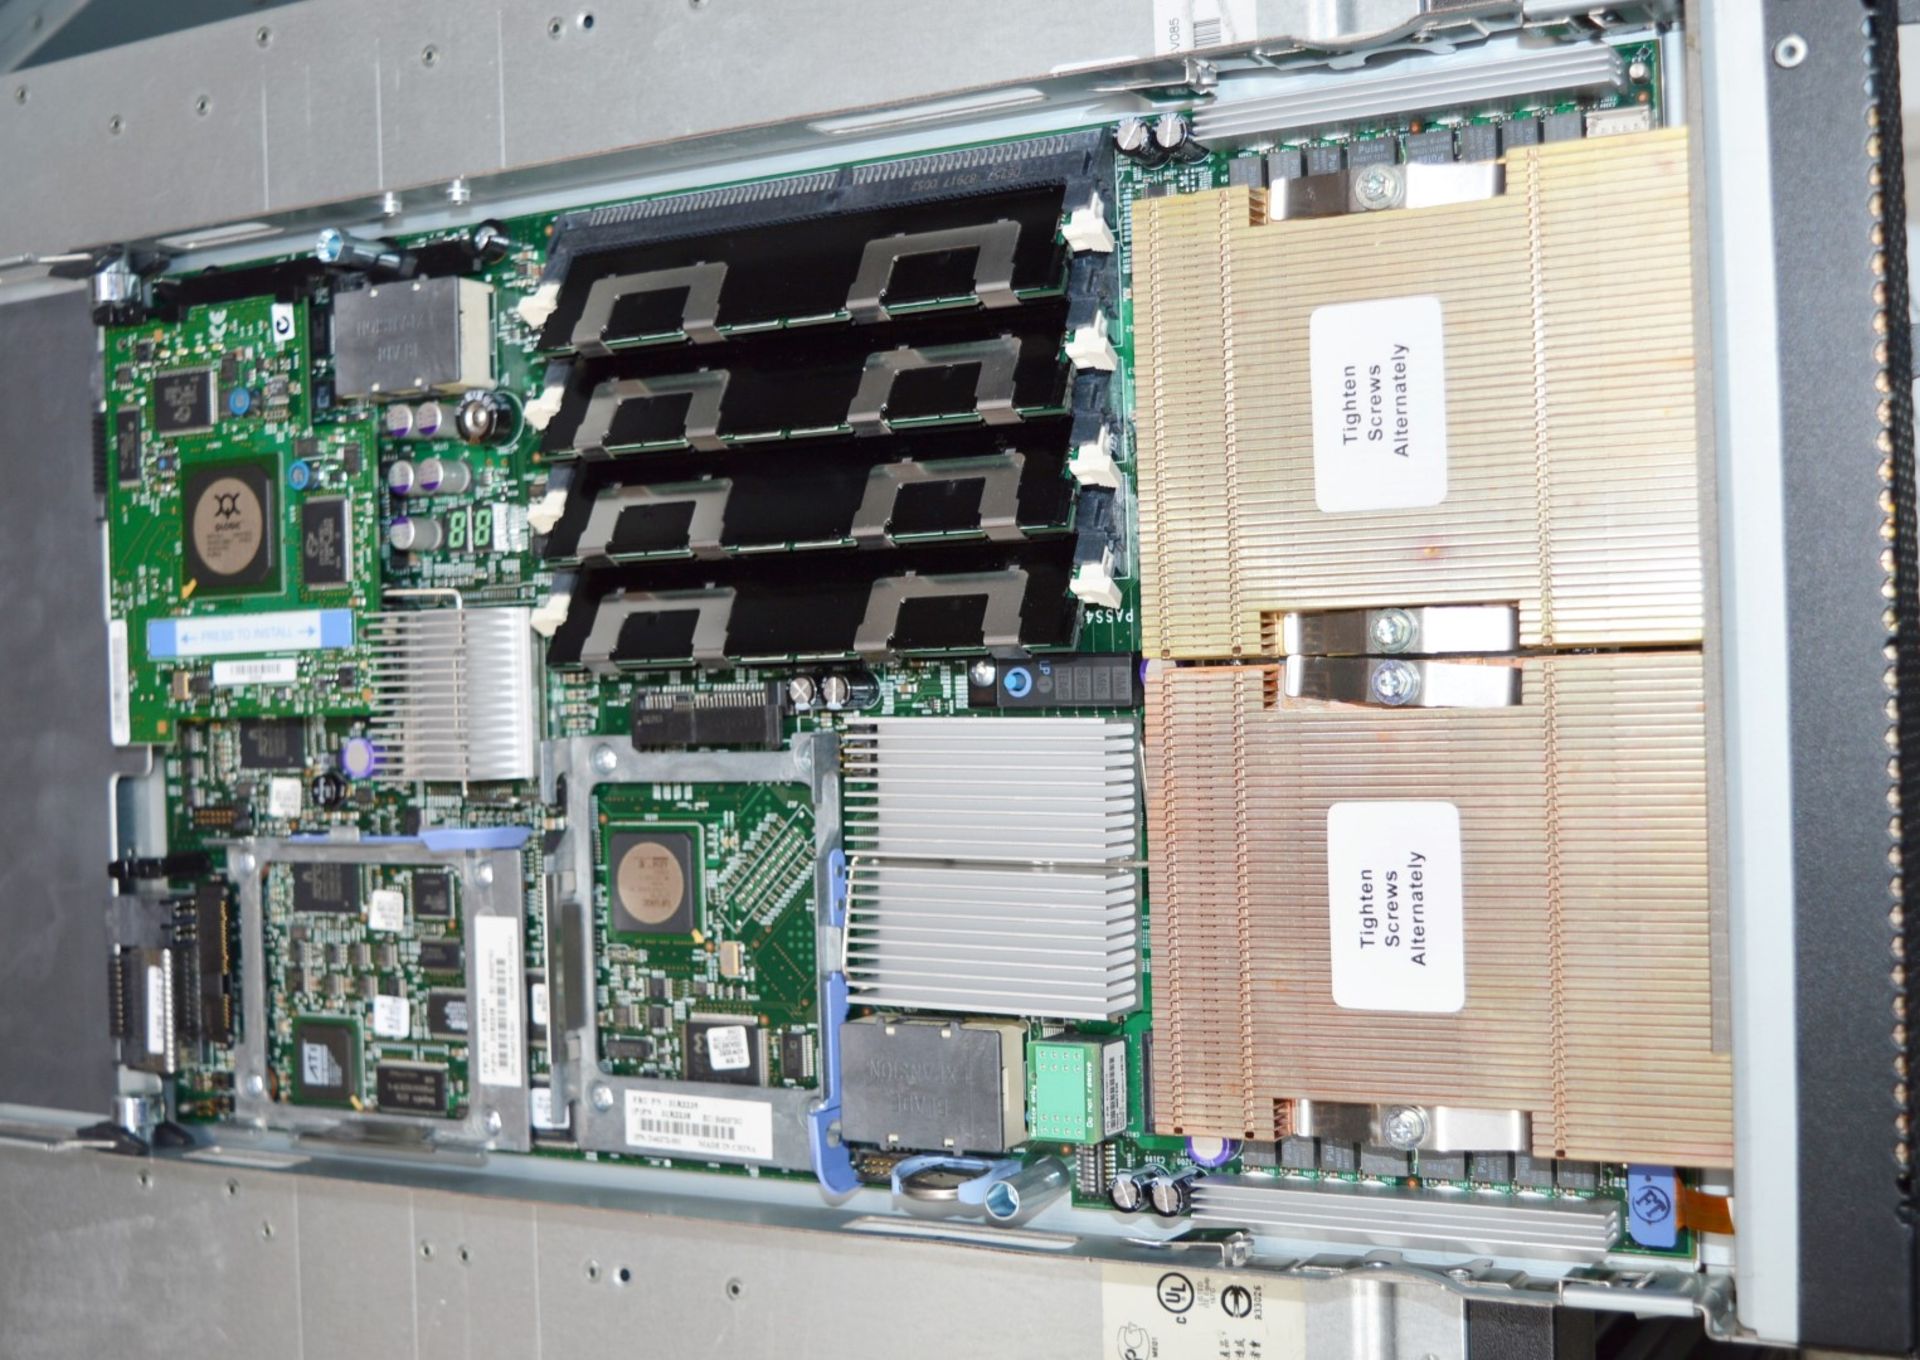 1 x IBM BladeCenter Chassis With 3 x HS21 Servers - Model 8677-3XY - CL400 - Ref IT457 - Location: - Image 6 of 7